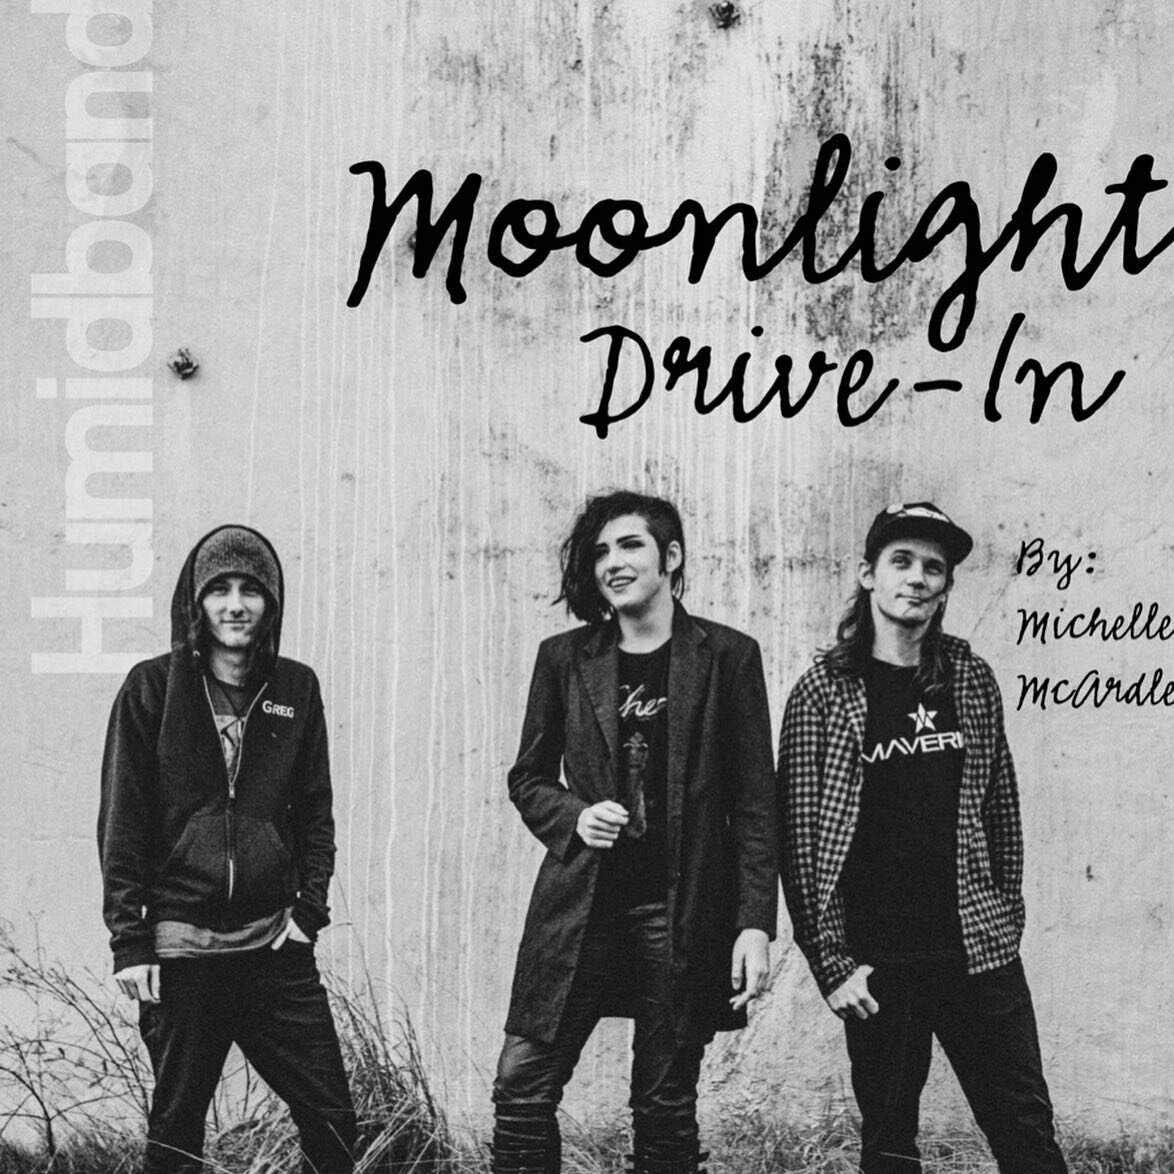 Check out our featured band @moonlight_drive_in A great local band with tons of potential. Read their story here: https://www.humidbeing.com/humid-bands-1/2020/2/29/moonlight-drive-in Great article written by @michellemmcardle Hit us up at @humidbein